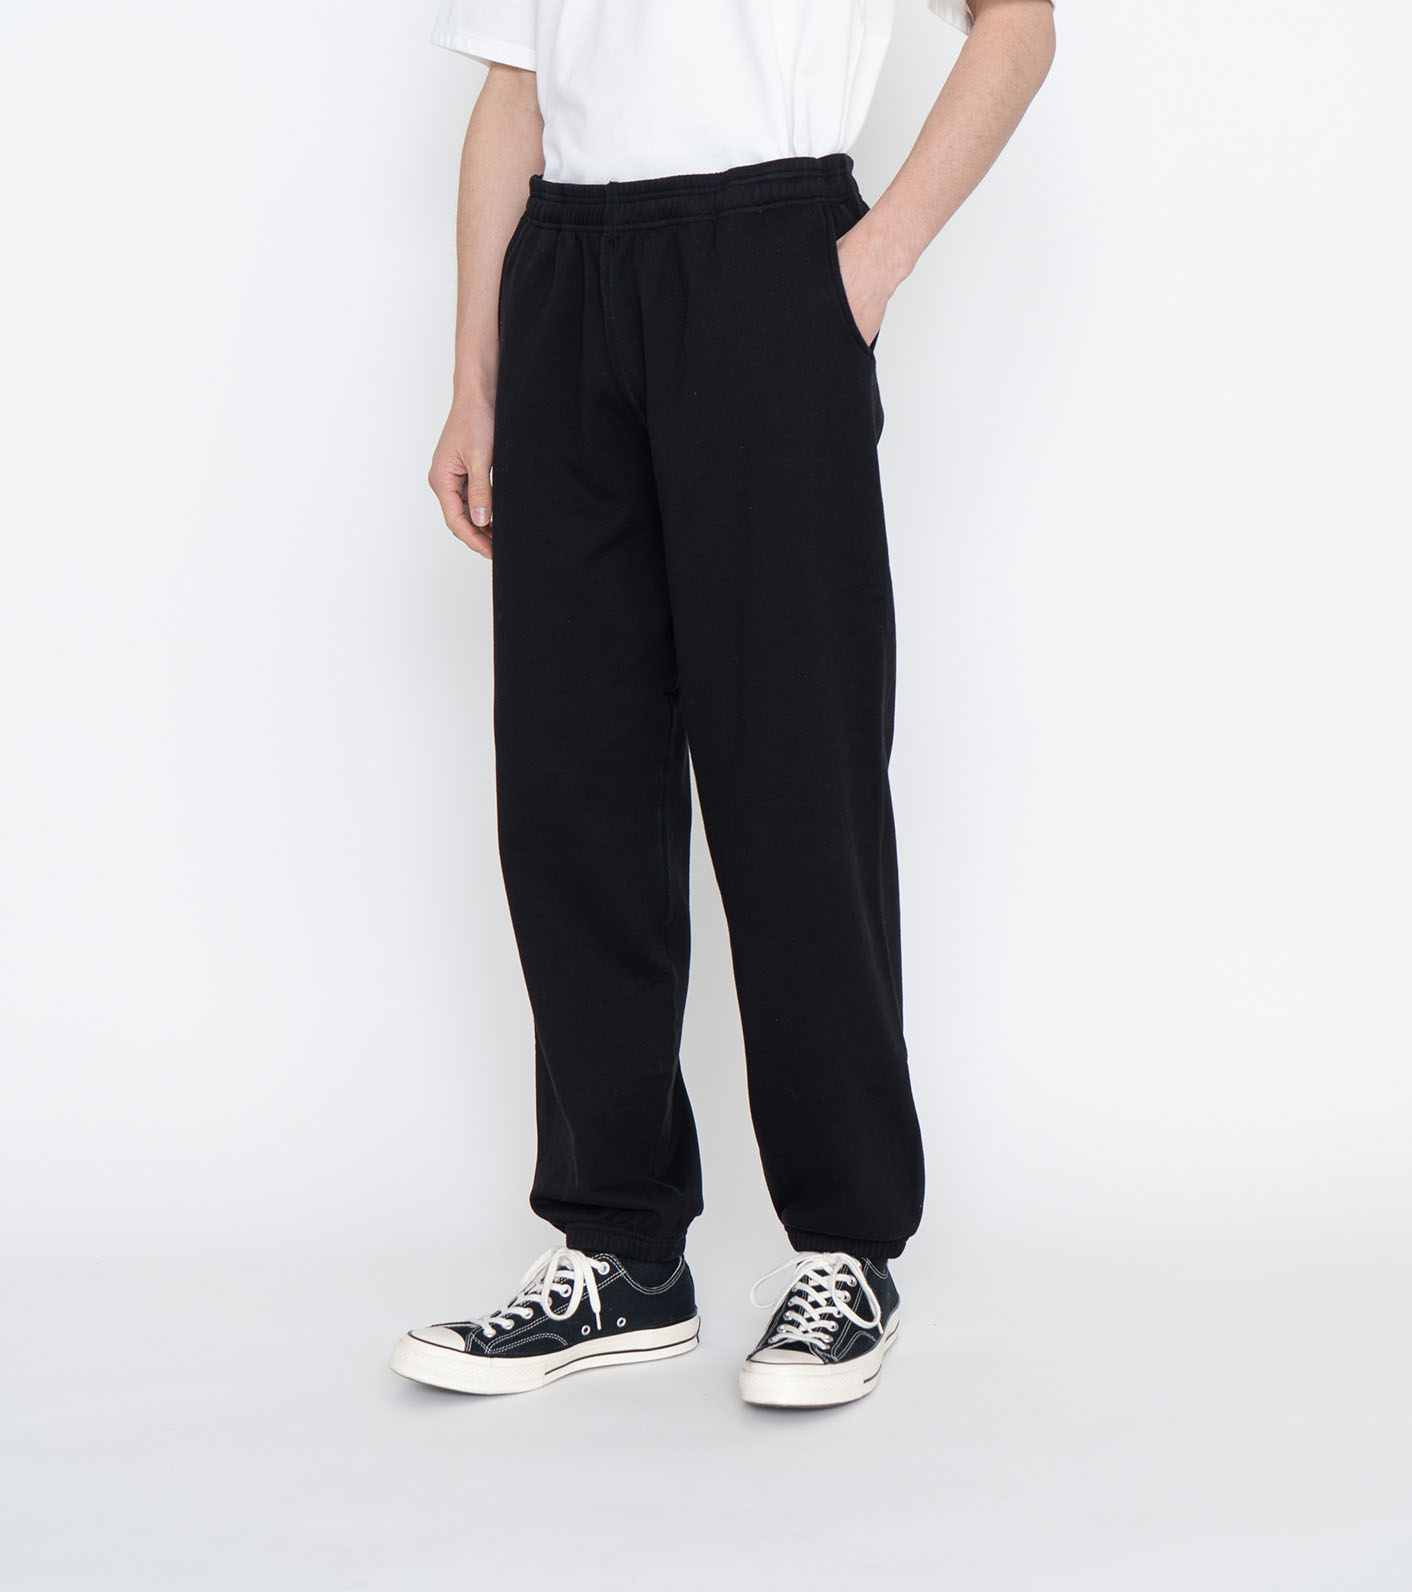 L'Appartement GOOD GRIEF SWEAT PANTSパンツ